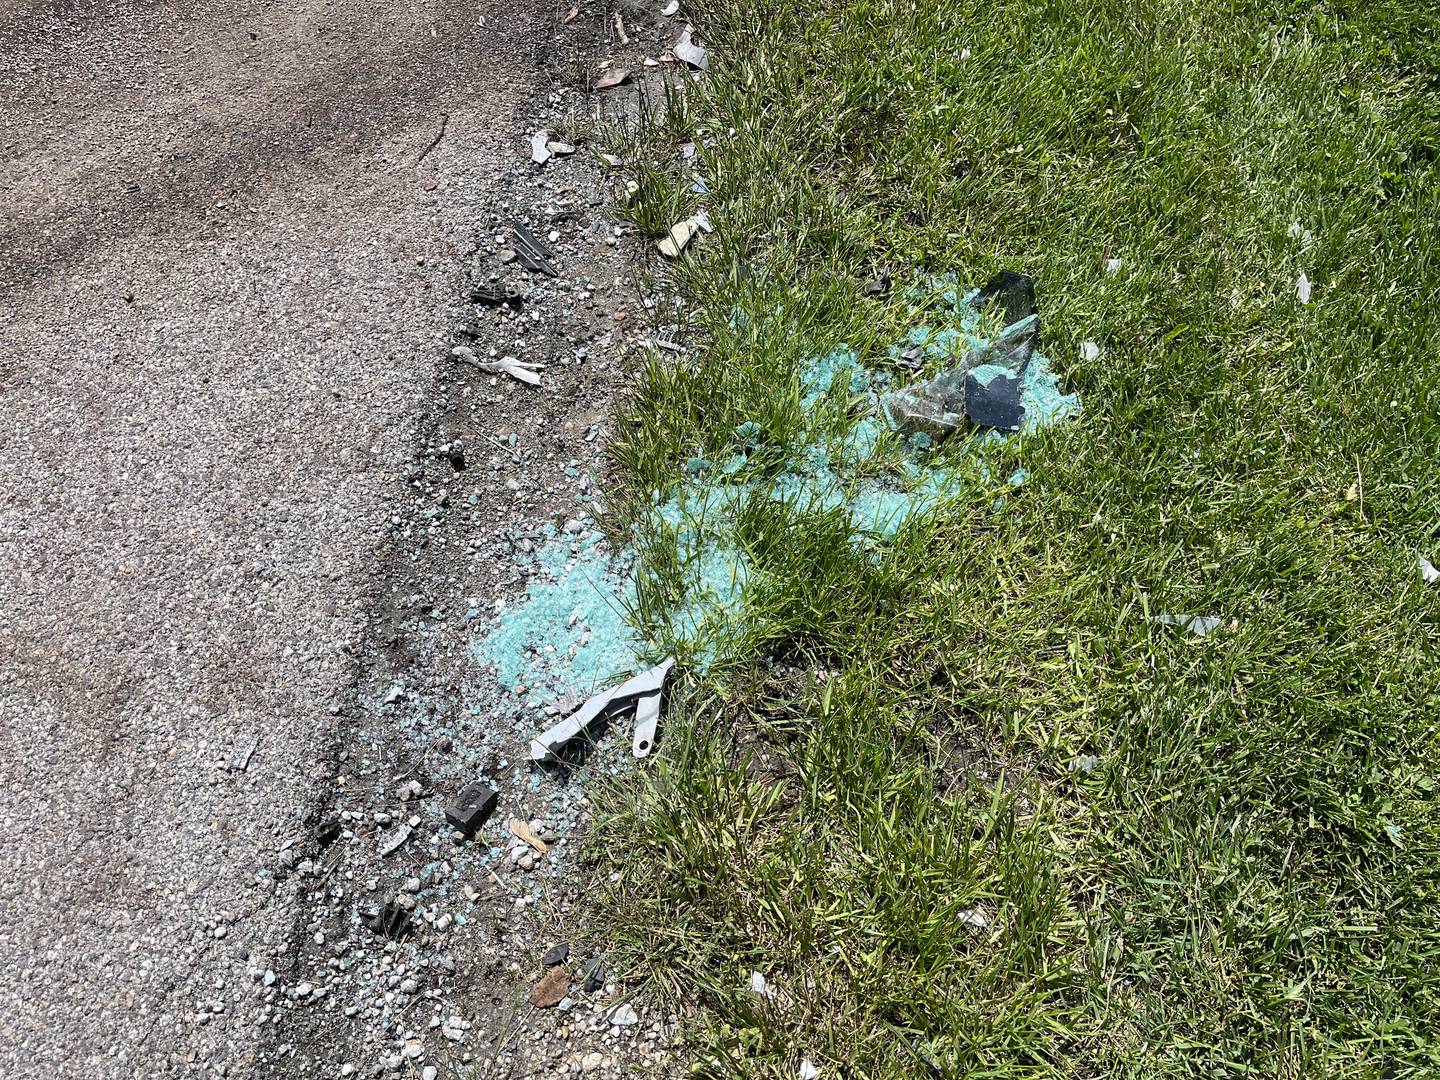 Shattered glass on the side of Route 52 at the intersection of Route 52 and Baker Road in Manhattan Township, seen on Sunday, May 22, 2022. A crash occurred on Saturday, May 21, 2022, that left three people dead.